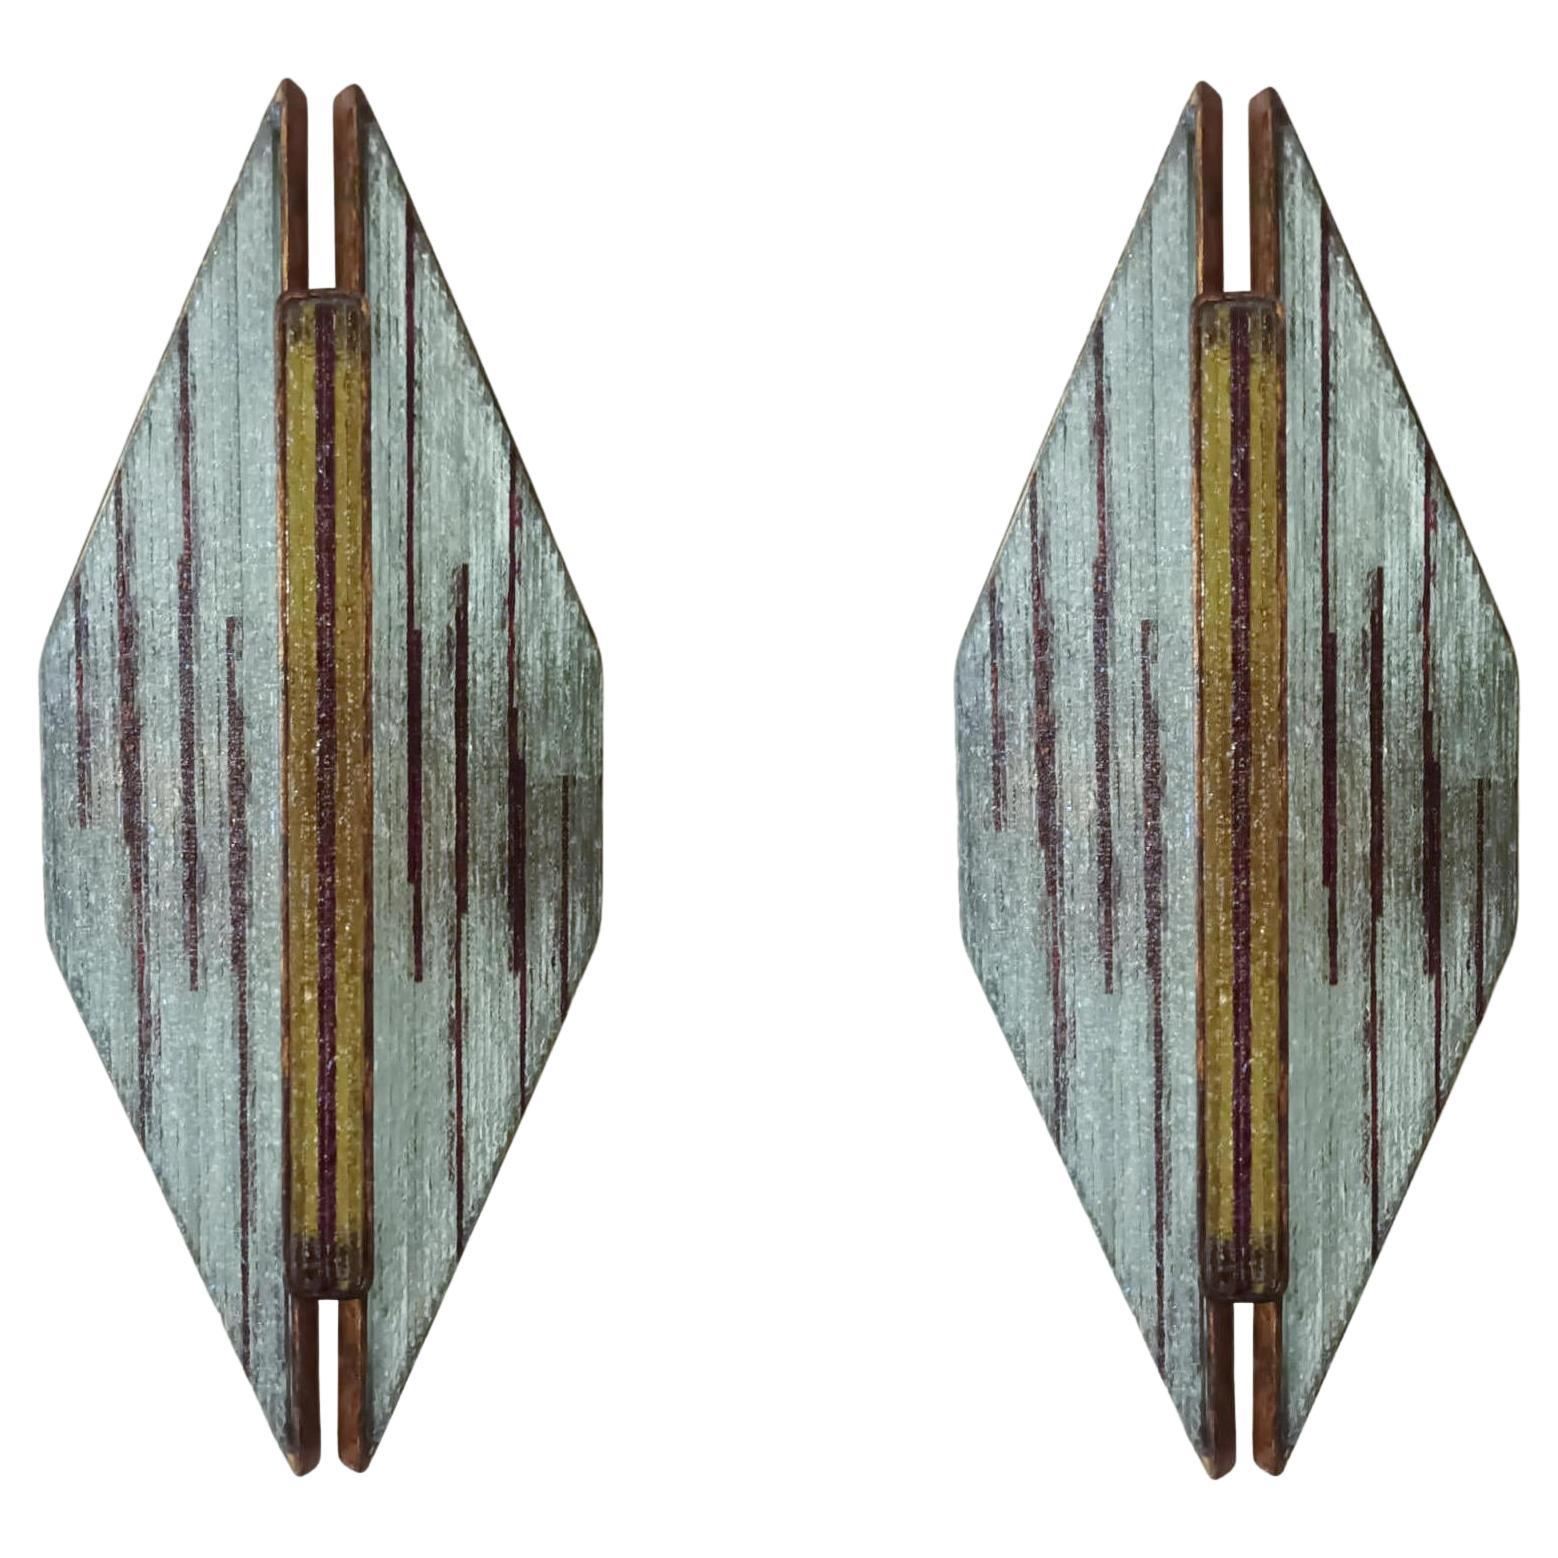 Pair of Pink Stripes Brutalist Sconces by Marino Poccetti